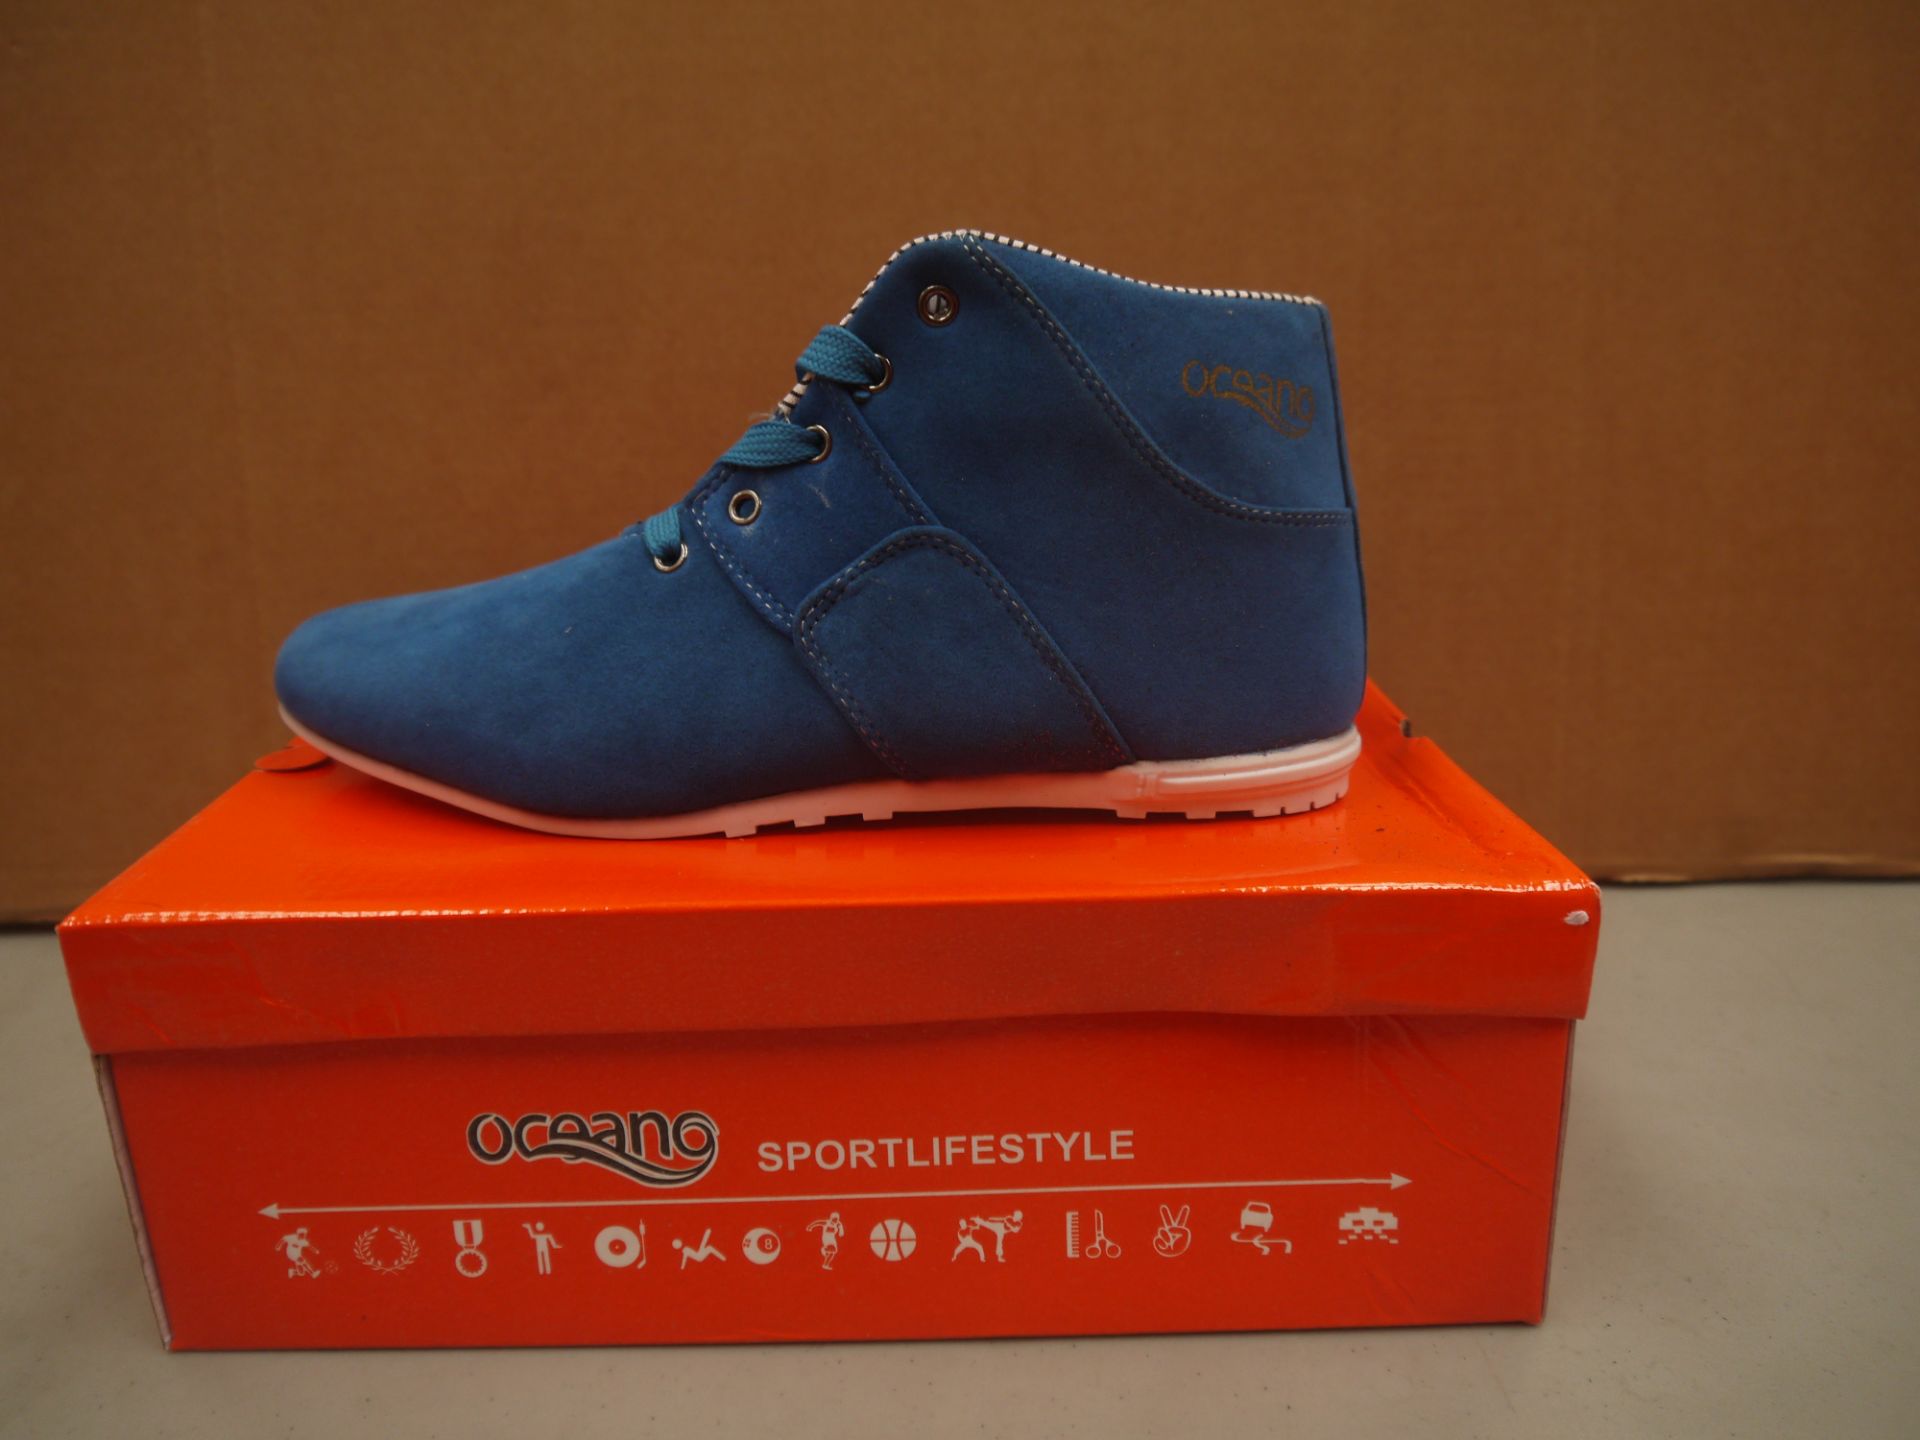 Mens Blue Suede Oceano trainer style boot new and boxed size UK9